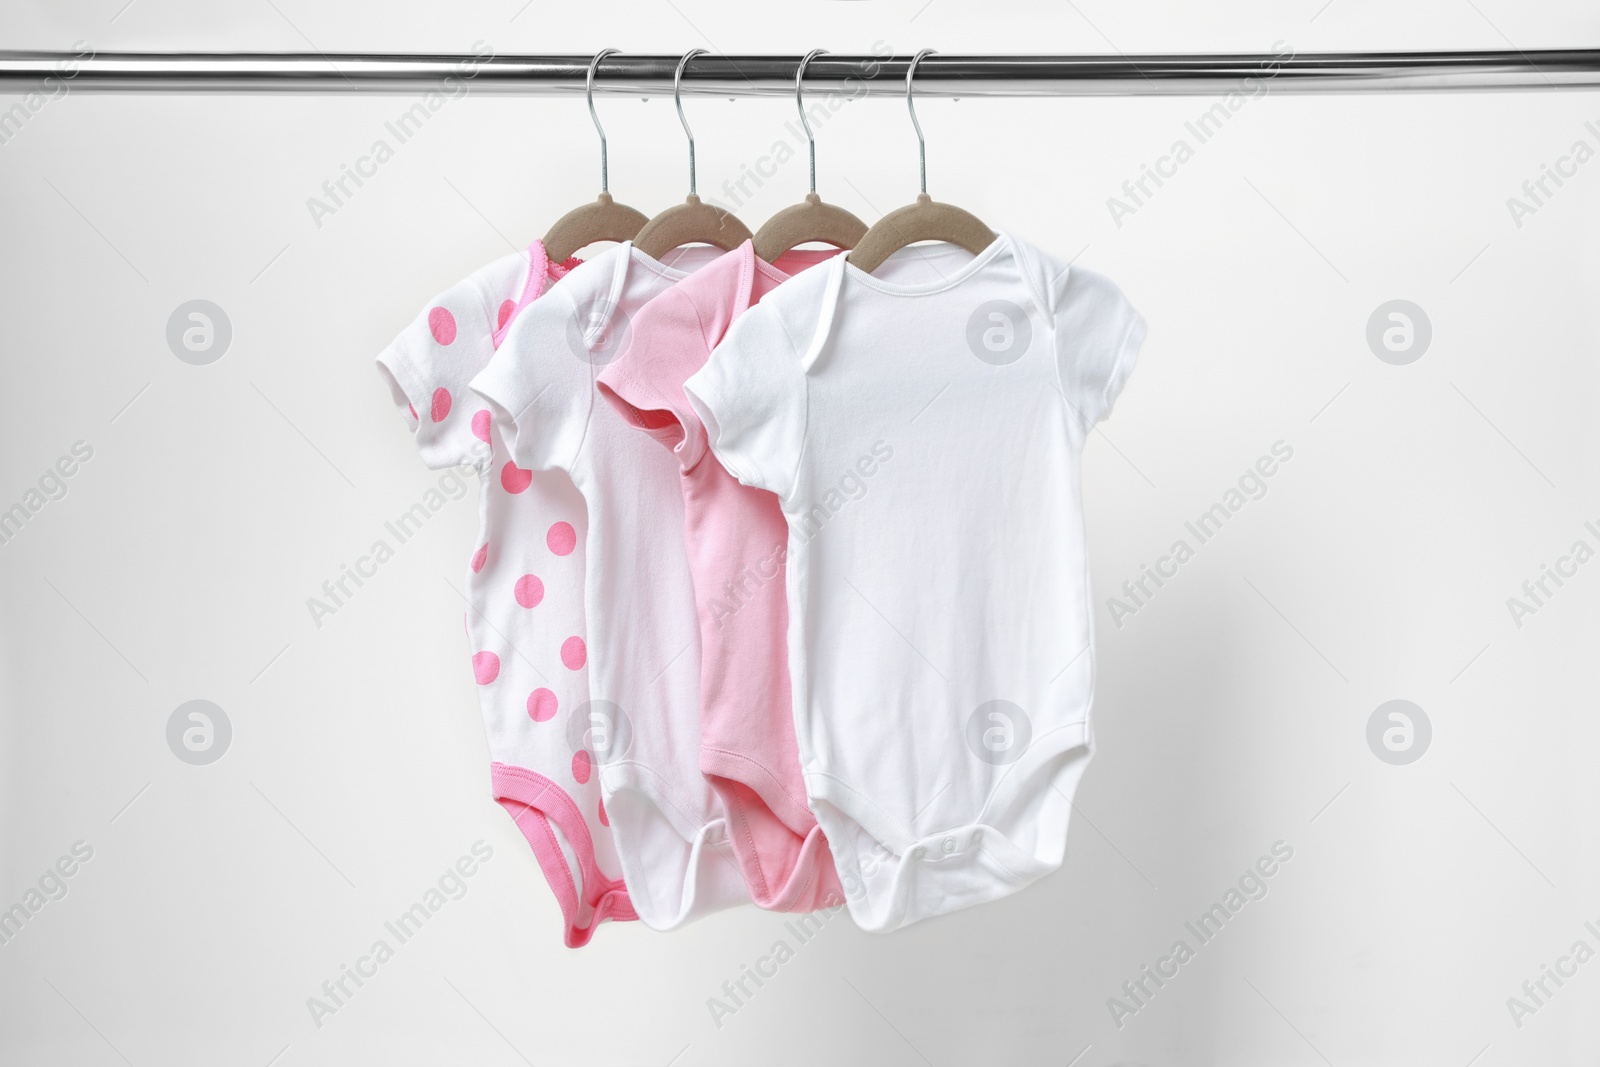 Photo of Baby bodysuits hanging on rack near white wall